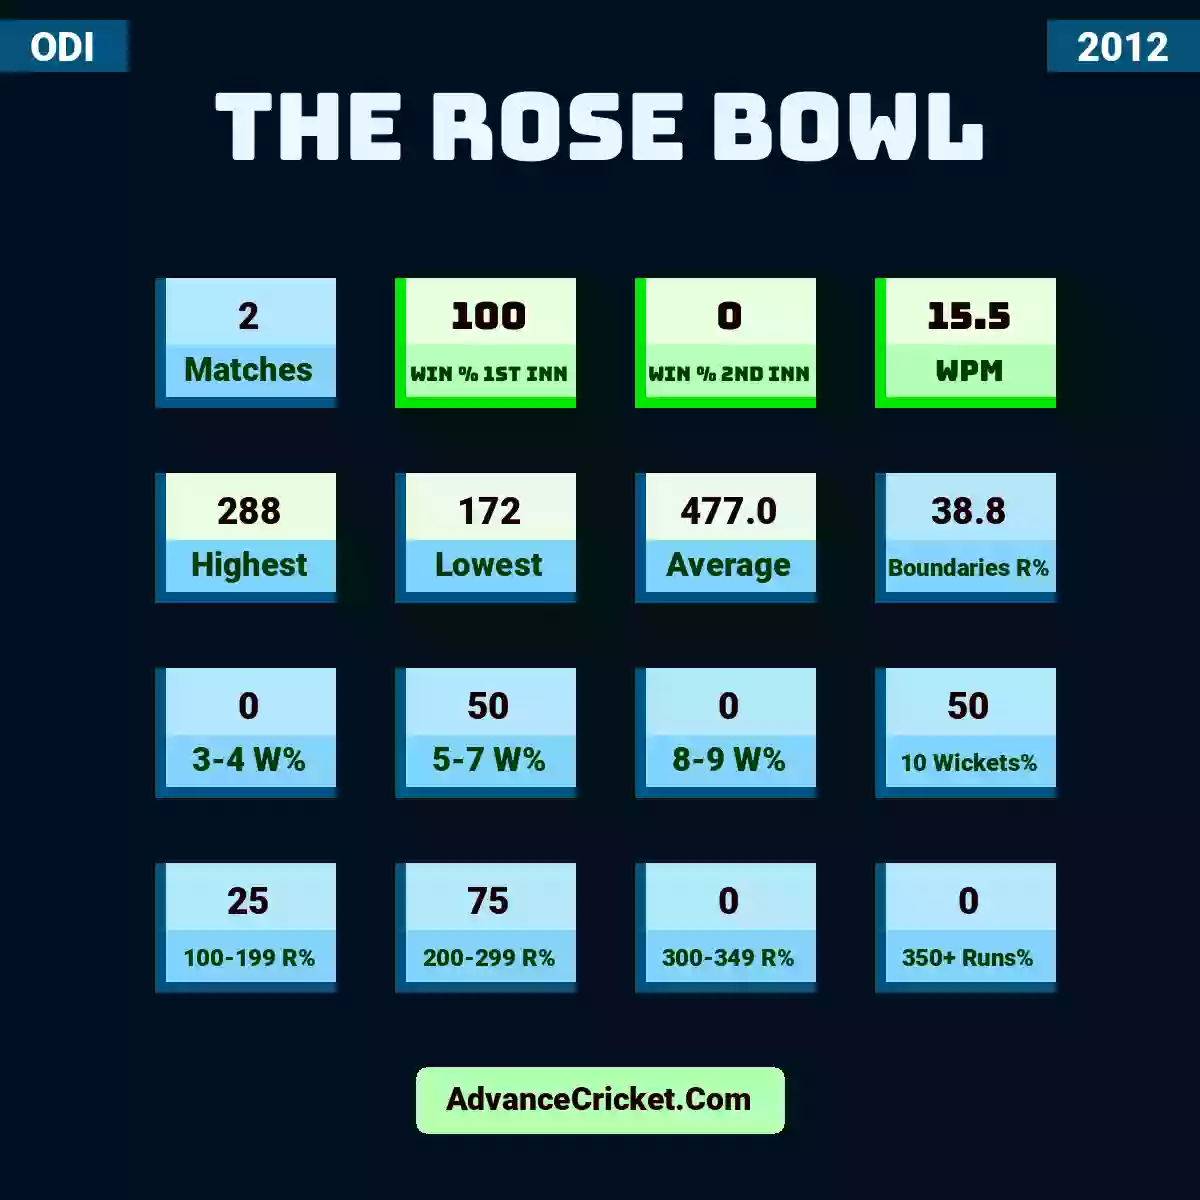 Image showing The Rose Bowl with Matches: 2, Win % 1st Inn: 100, Win % 2nd Inn: 0, WPM: 15.5, Highest: 288, Lowest: 172, Average: 477.0, Boundaries R%: 38.8, 3-4 W%: 0, 5-7 W%: 50, 8-9 W%: 0, 10 Wickets%: 50, 100-199 R%: 25, 200-299 R%: 75, 300-349 R%: 0, 350+ Runs%: 0.